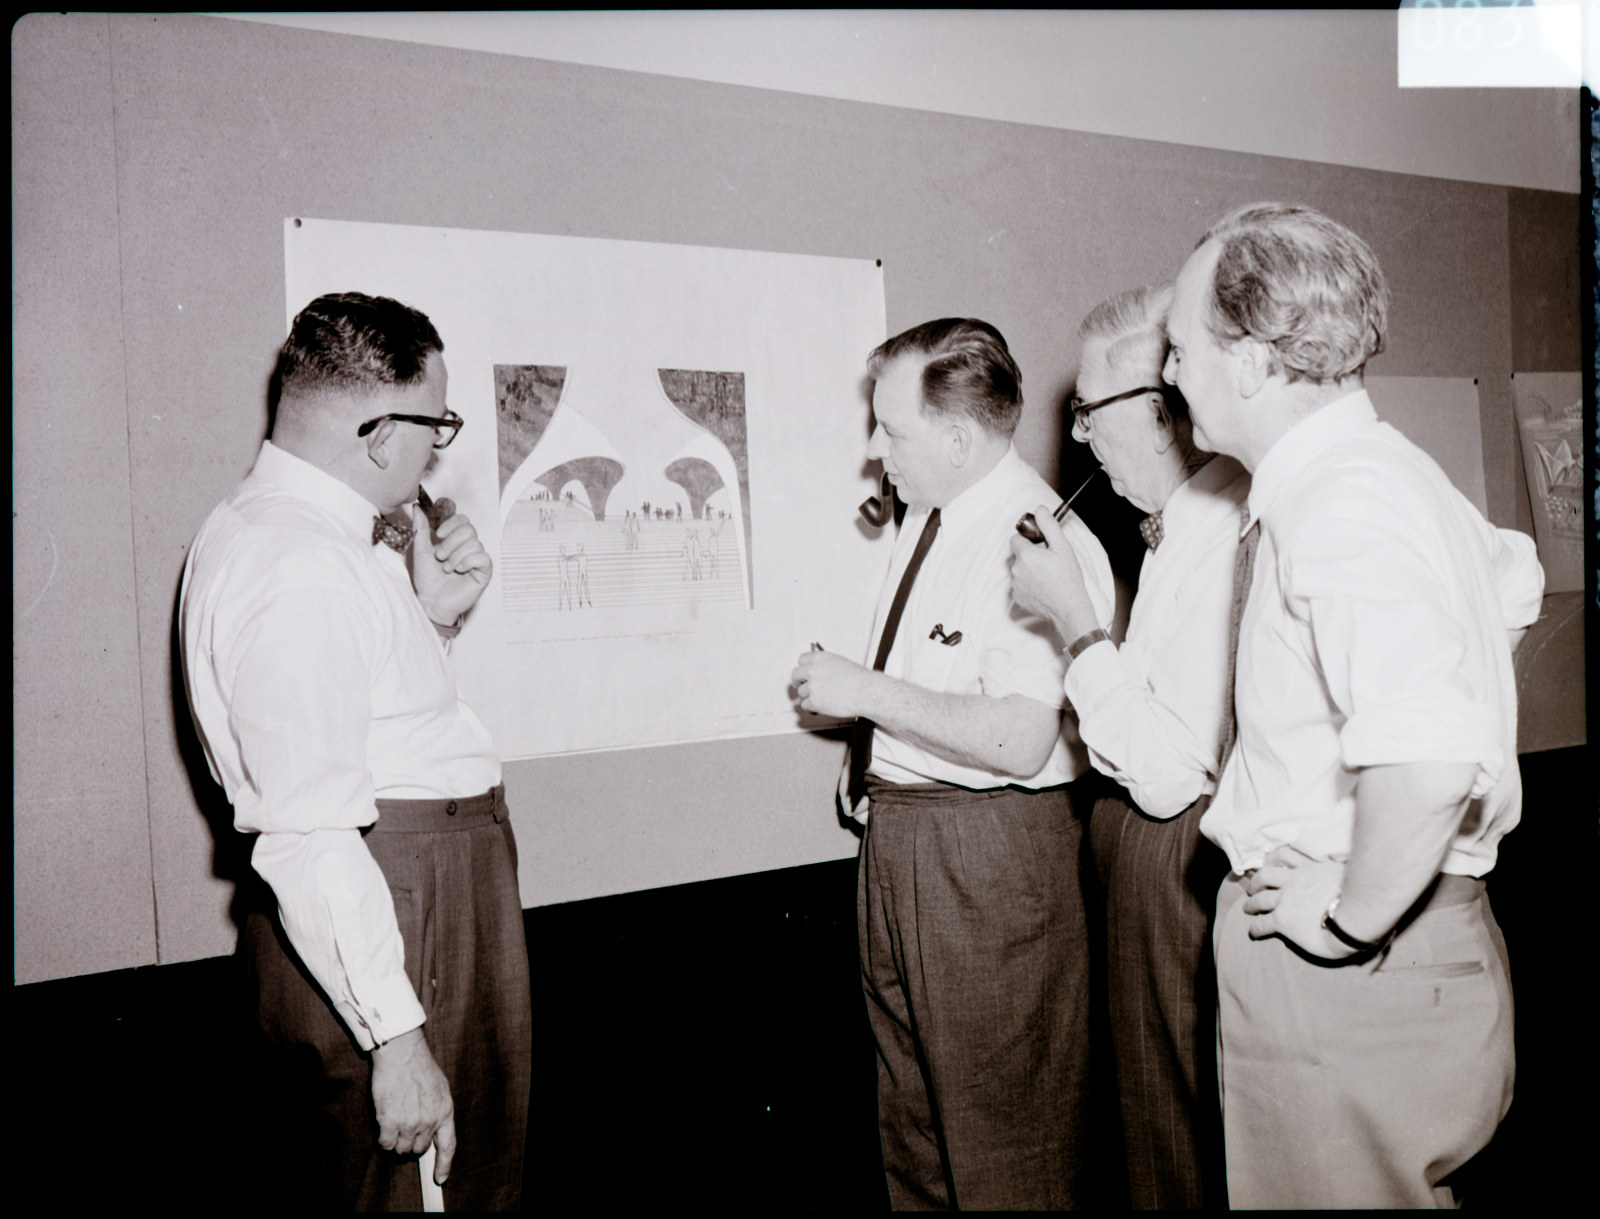 Government Printing Office 2 - 08373 - Opera House judging committee at Art Gallery [Department of Local Government; National Art Gallery of New South Wales; interiors; architects; architectural features; public servants] [GPO original locations or series - 47924] [11/1/1957]